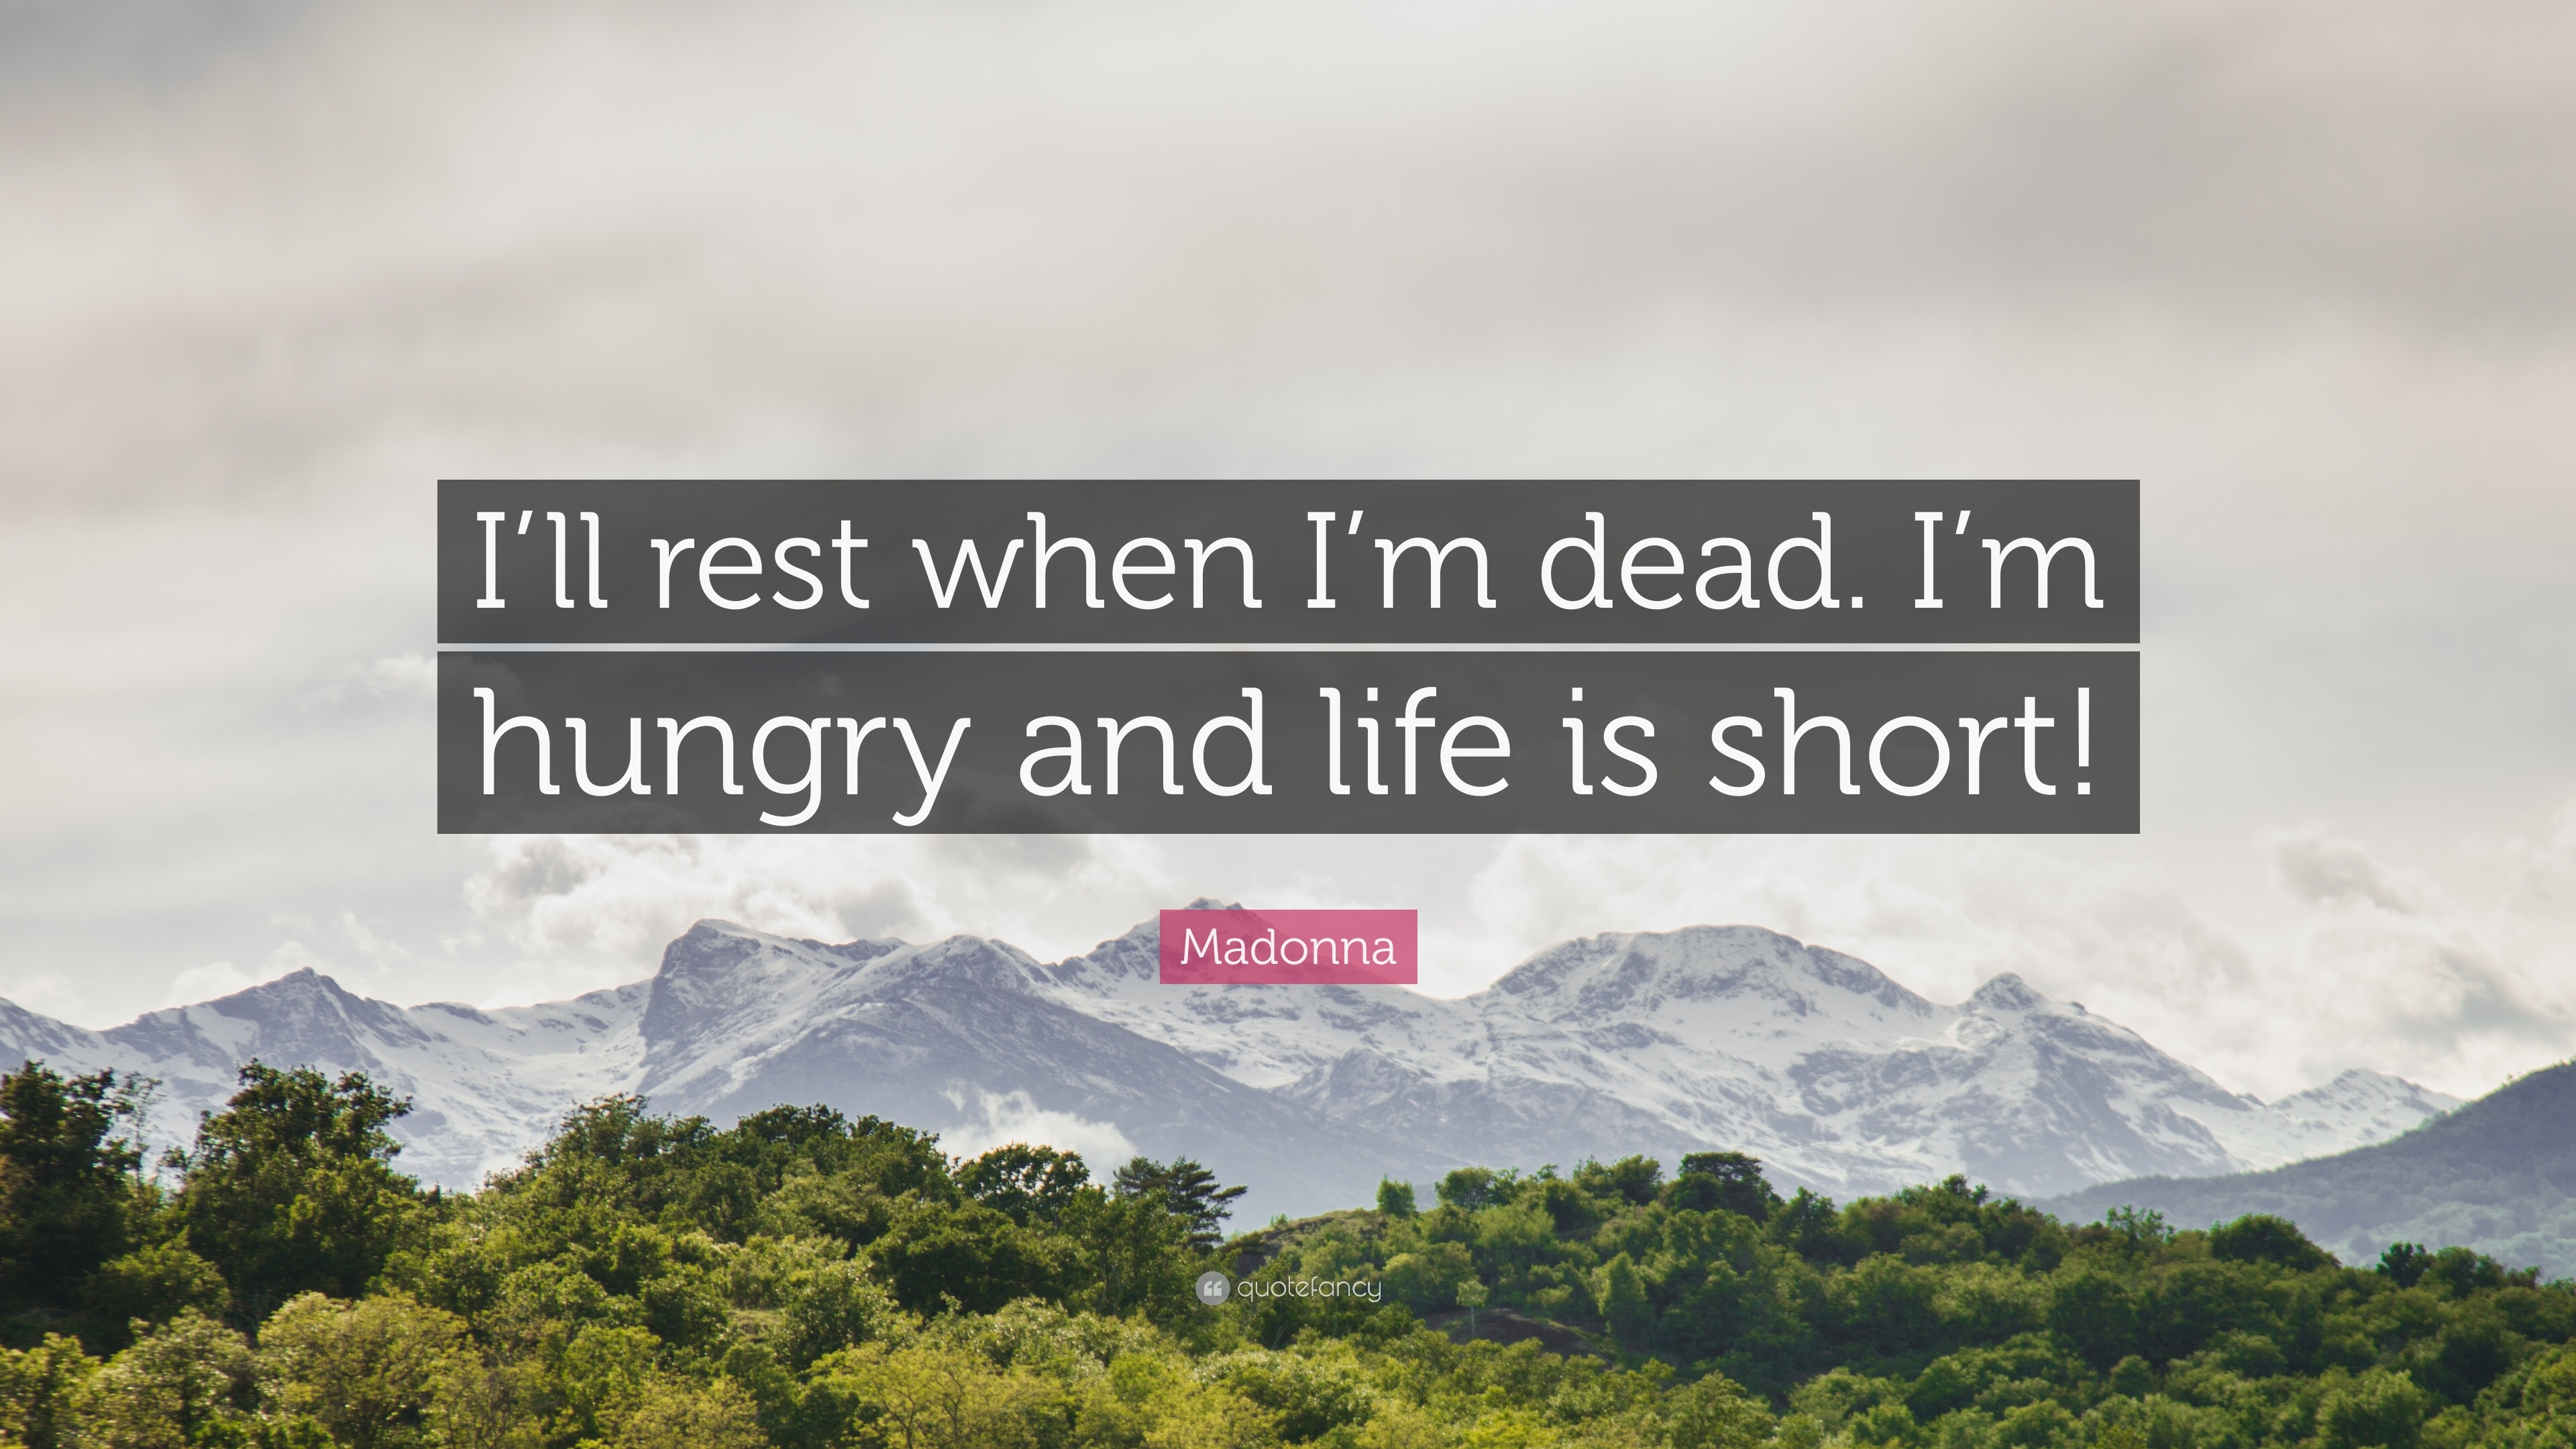 Madonna Quote: “I'll Rest When I'm Dead. I'm Hungry And Life Is Short!”